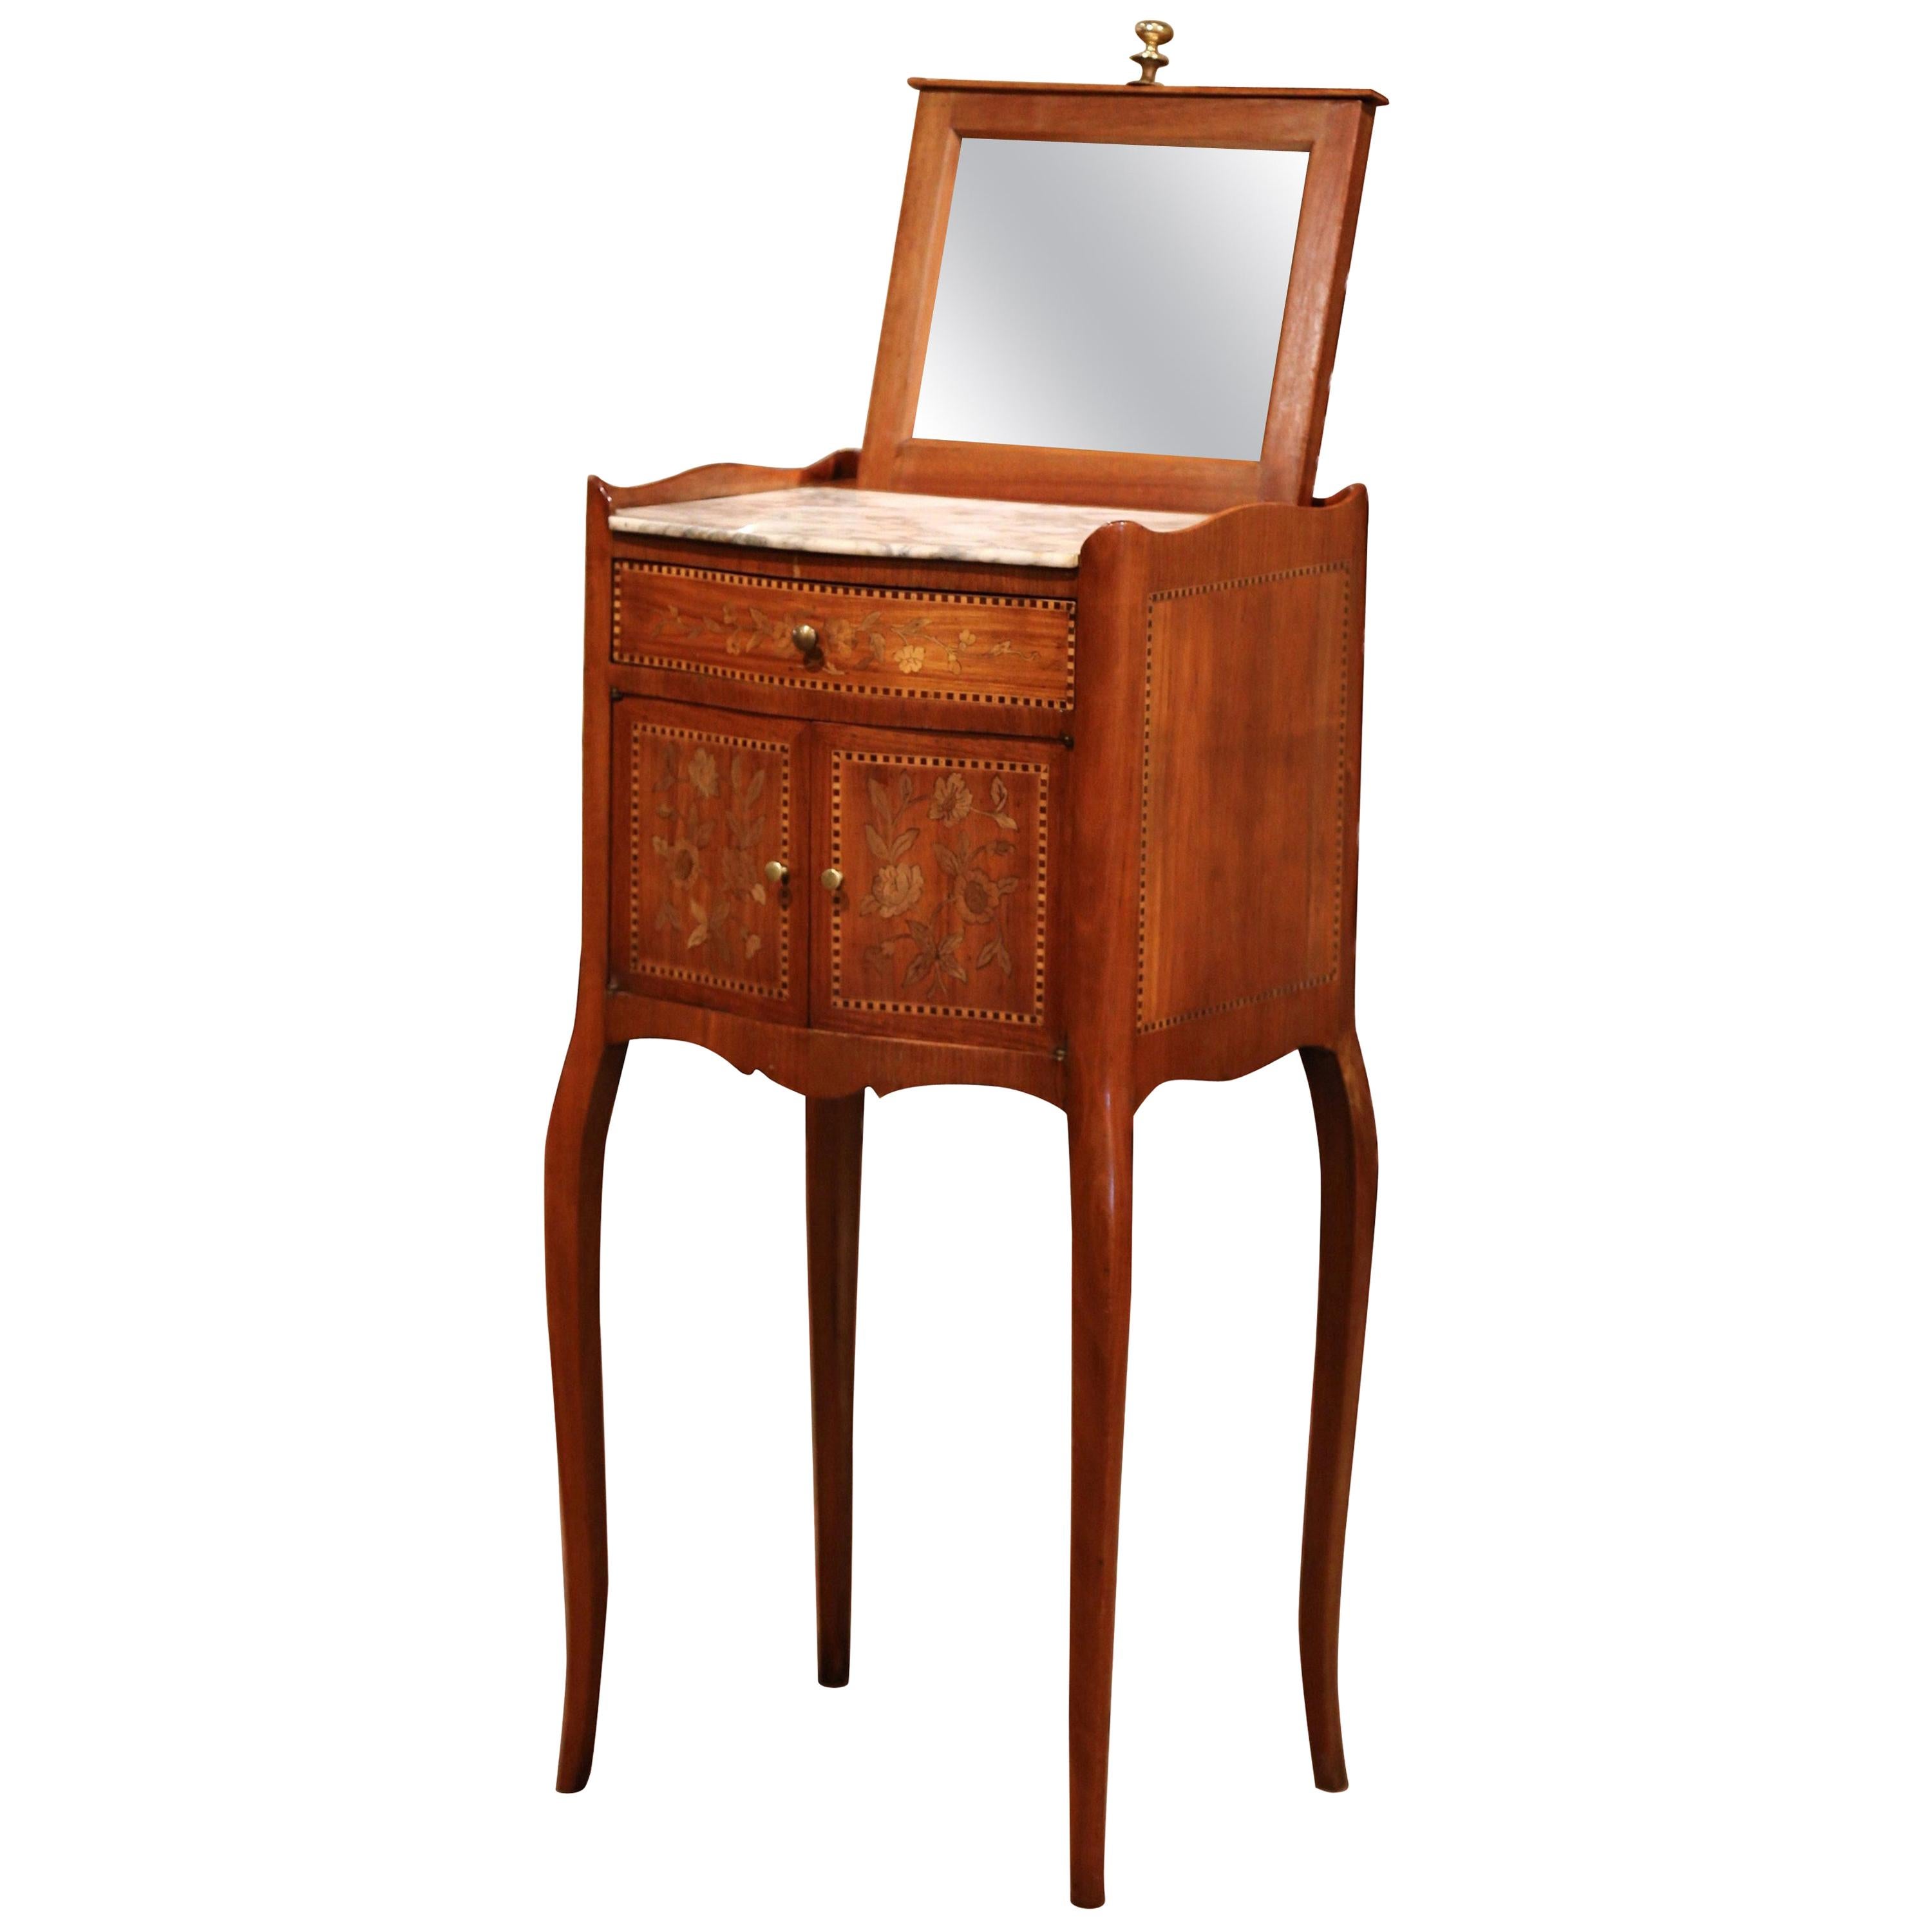 19th Century French Marquetry Walnut and Marble Nightstand with Pull up Mirror